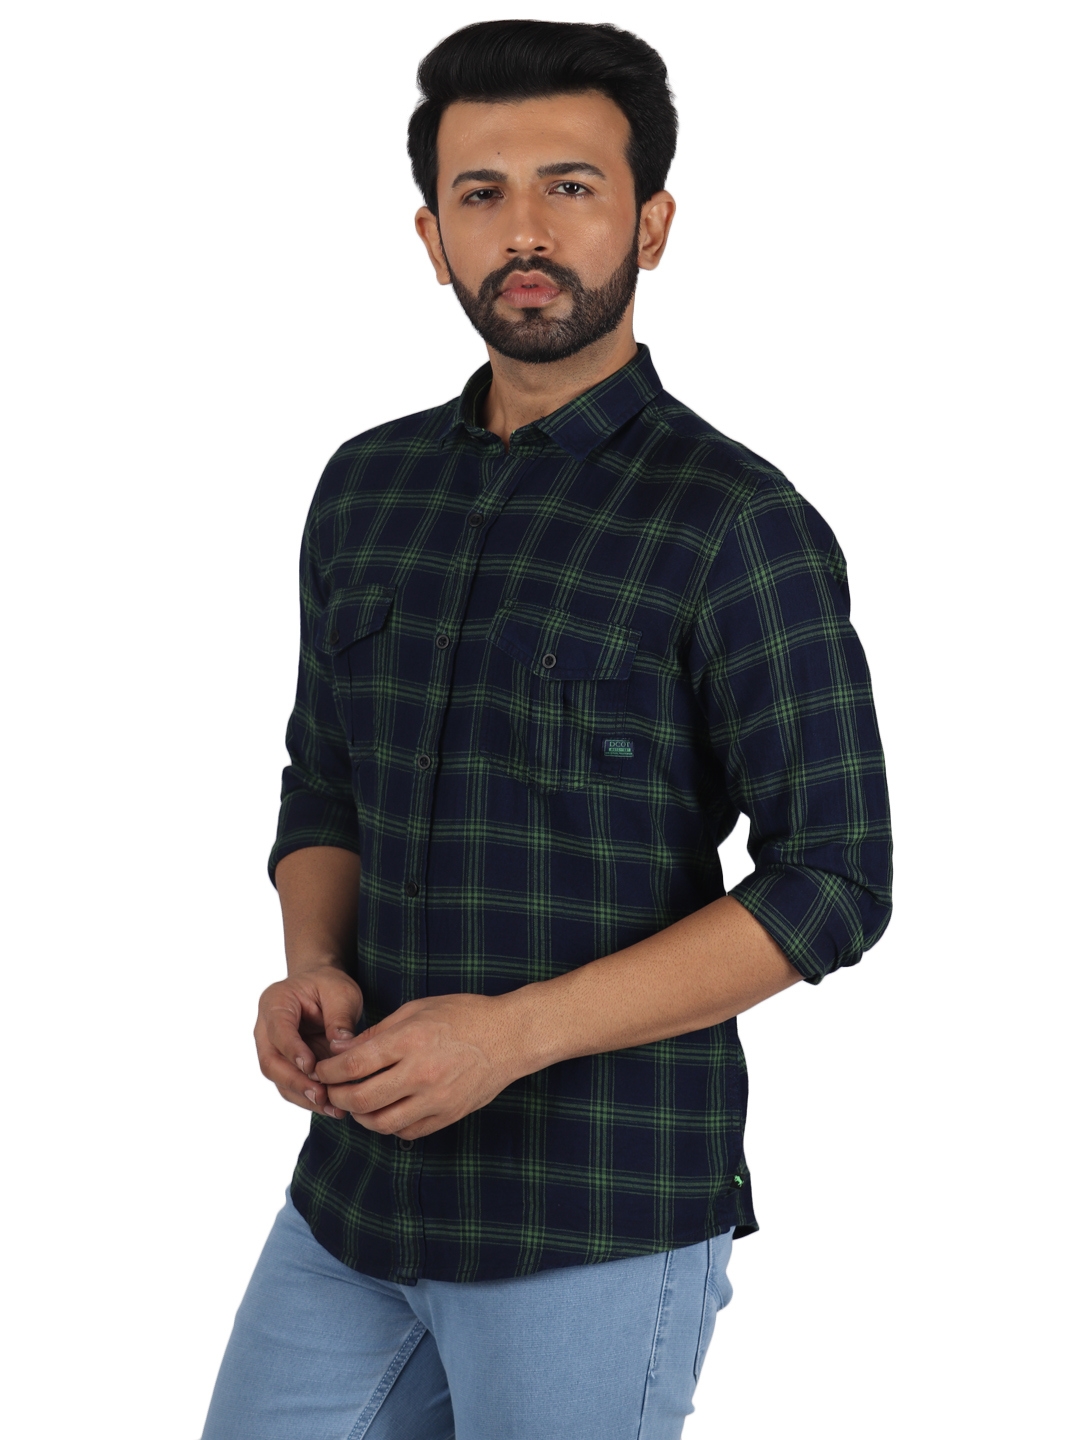 D'cot by Donear | D'cot by Donear Men's Green and Navy Cotton Casual Shirts 1